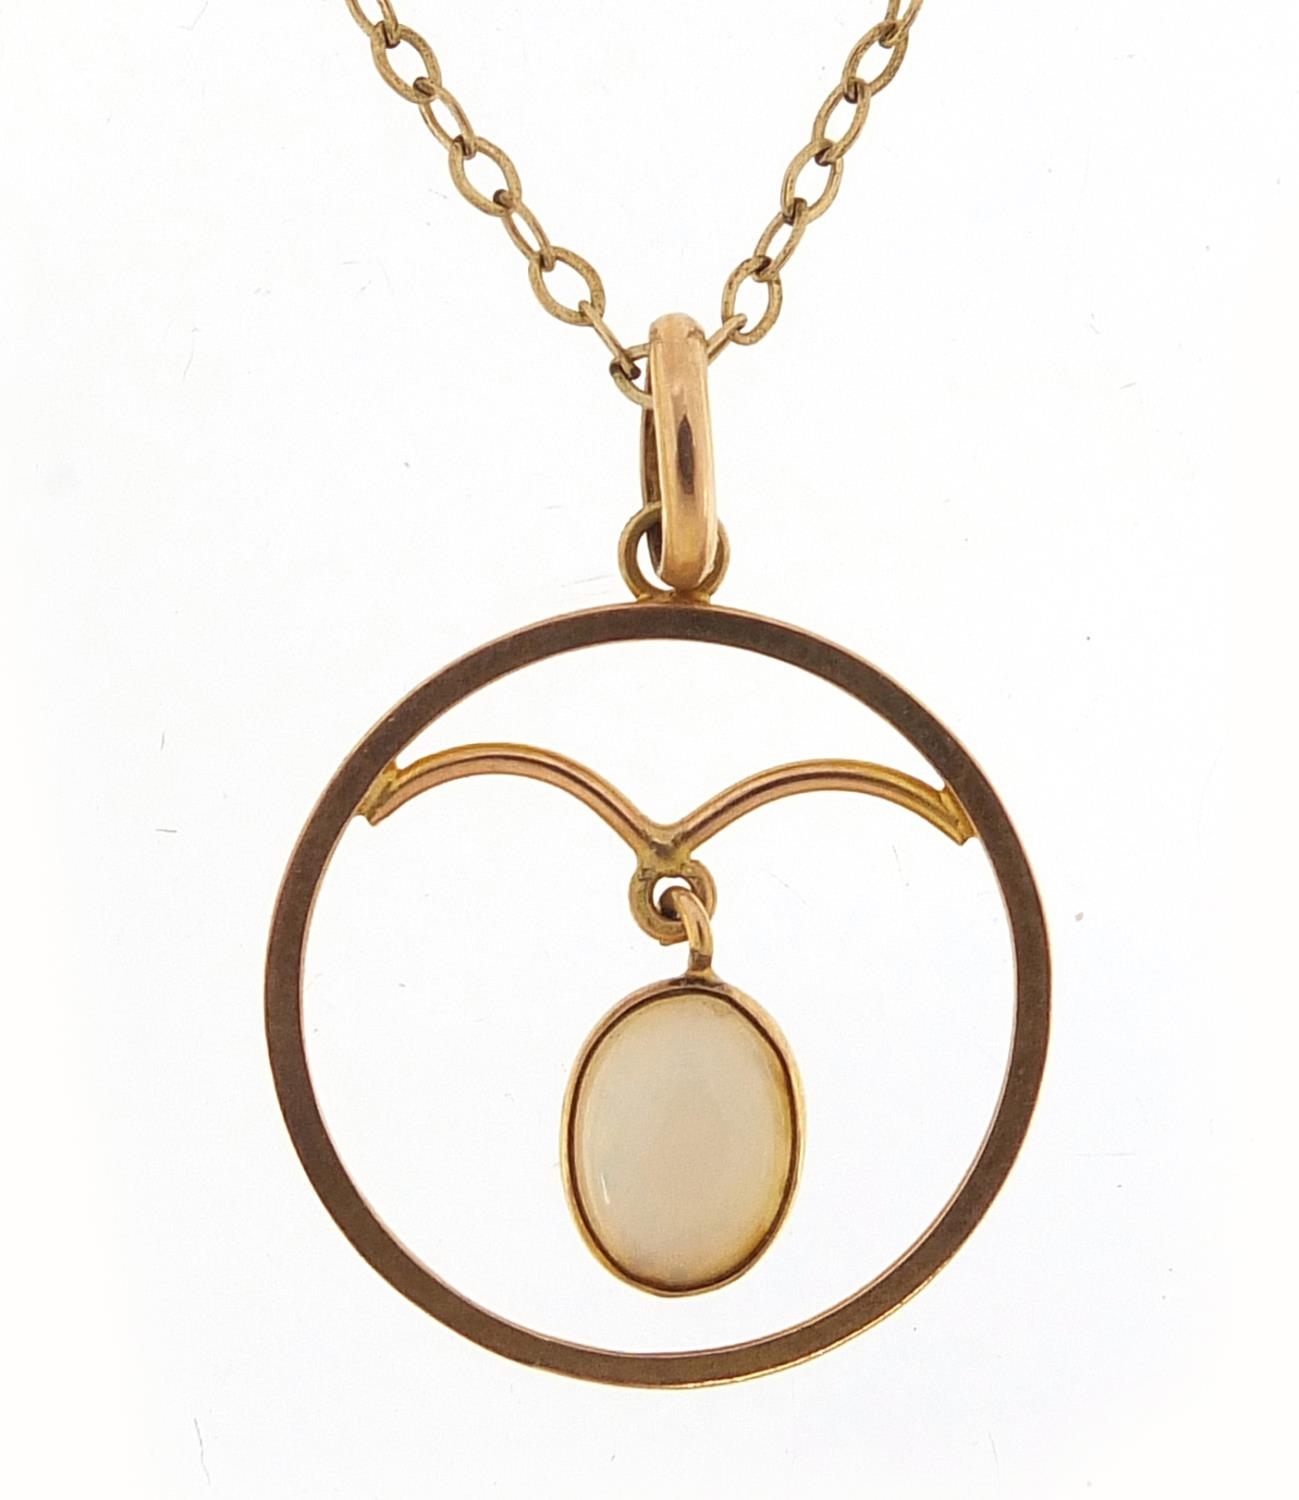 9ct gold opal pendant on a 9ct gold necklace, 2.6cm high and 42cm in length, 2.4g overall : For